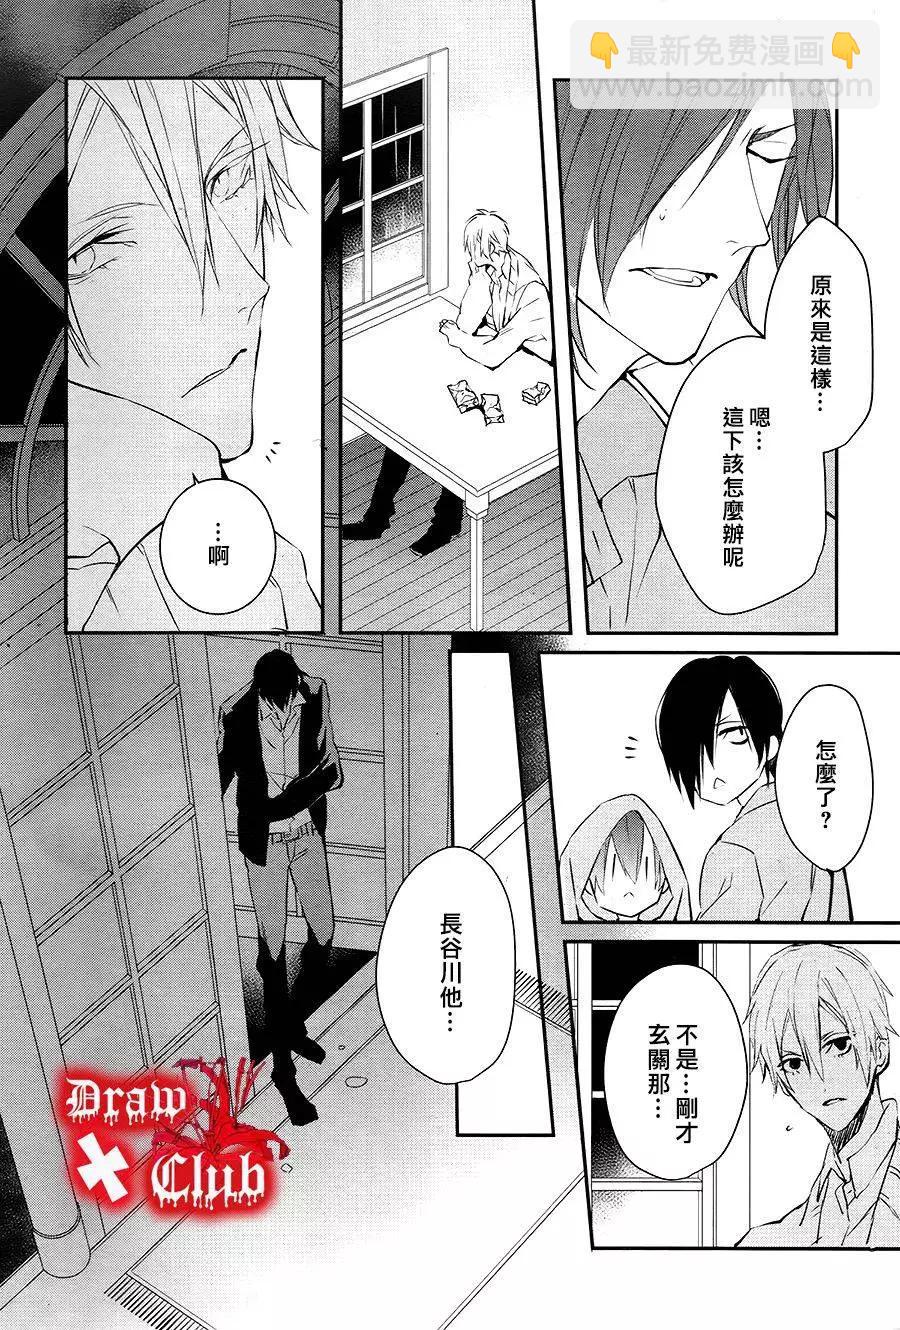 Bloody Mary - 第28回 - 1